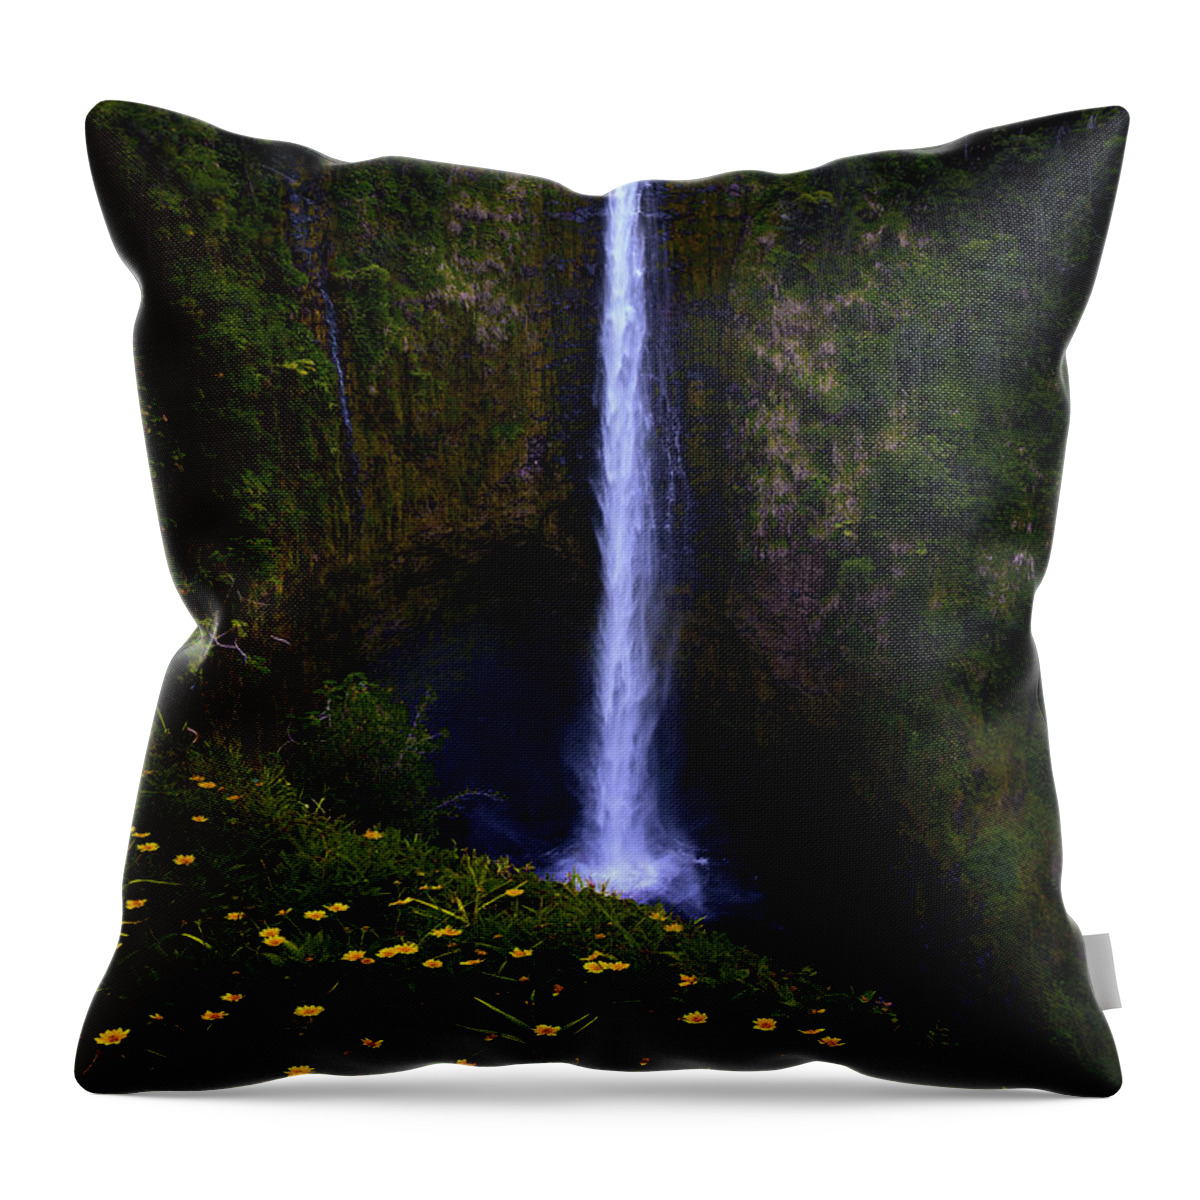  Throw Pillow featuring the photograph Akaka Falls by Micah Roemmling